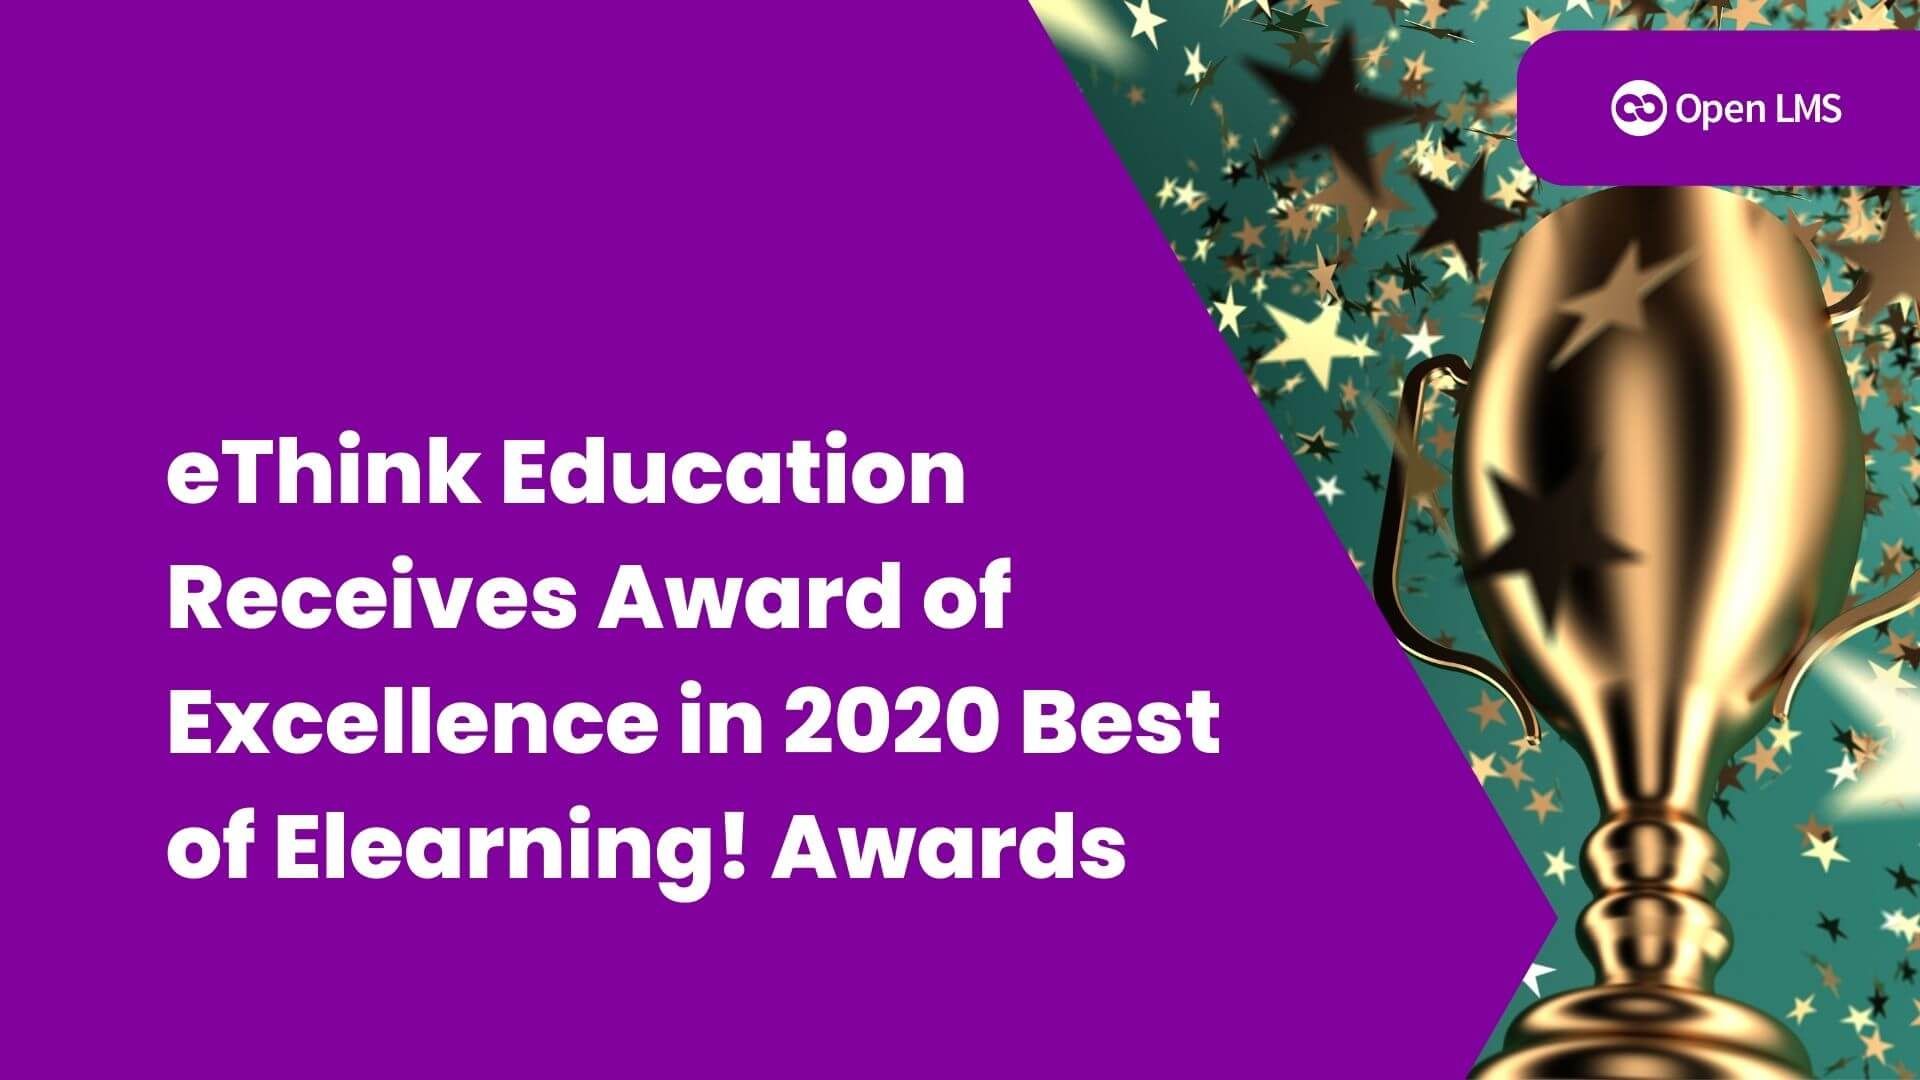 eThink Education Receives Award of Excellence in 2020 Best of Elearning! Awards